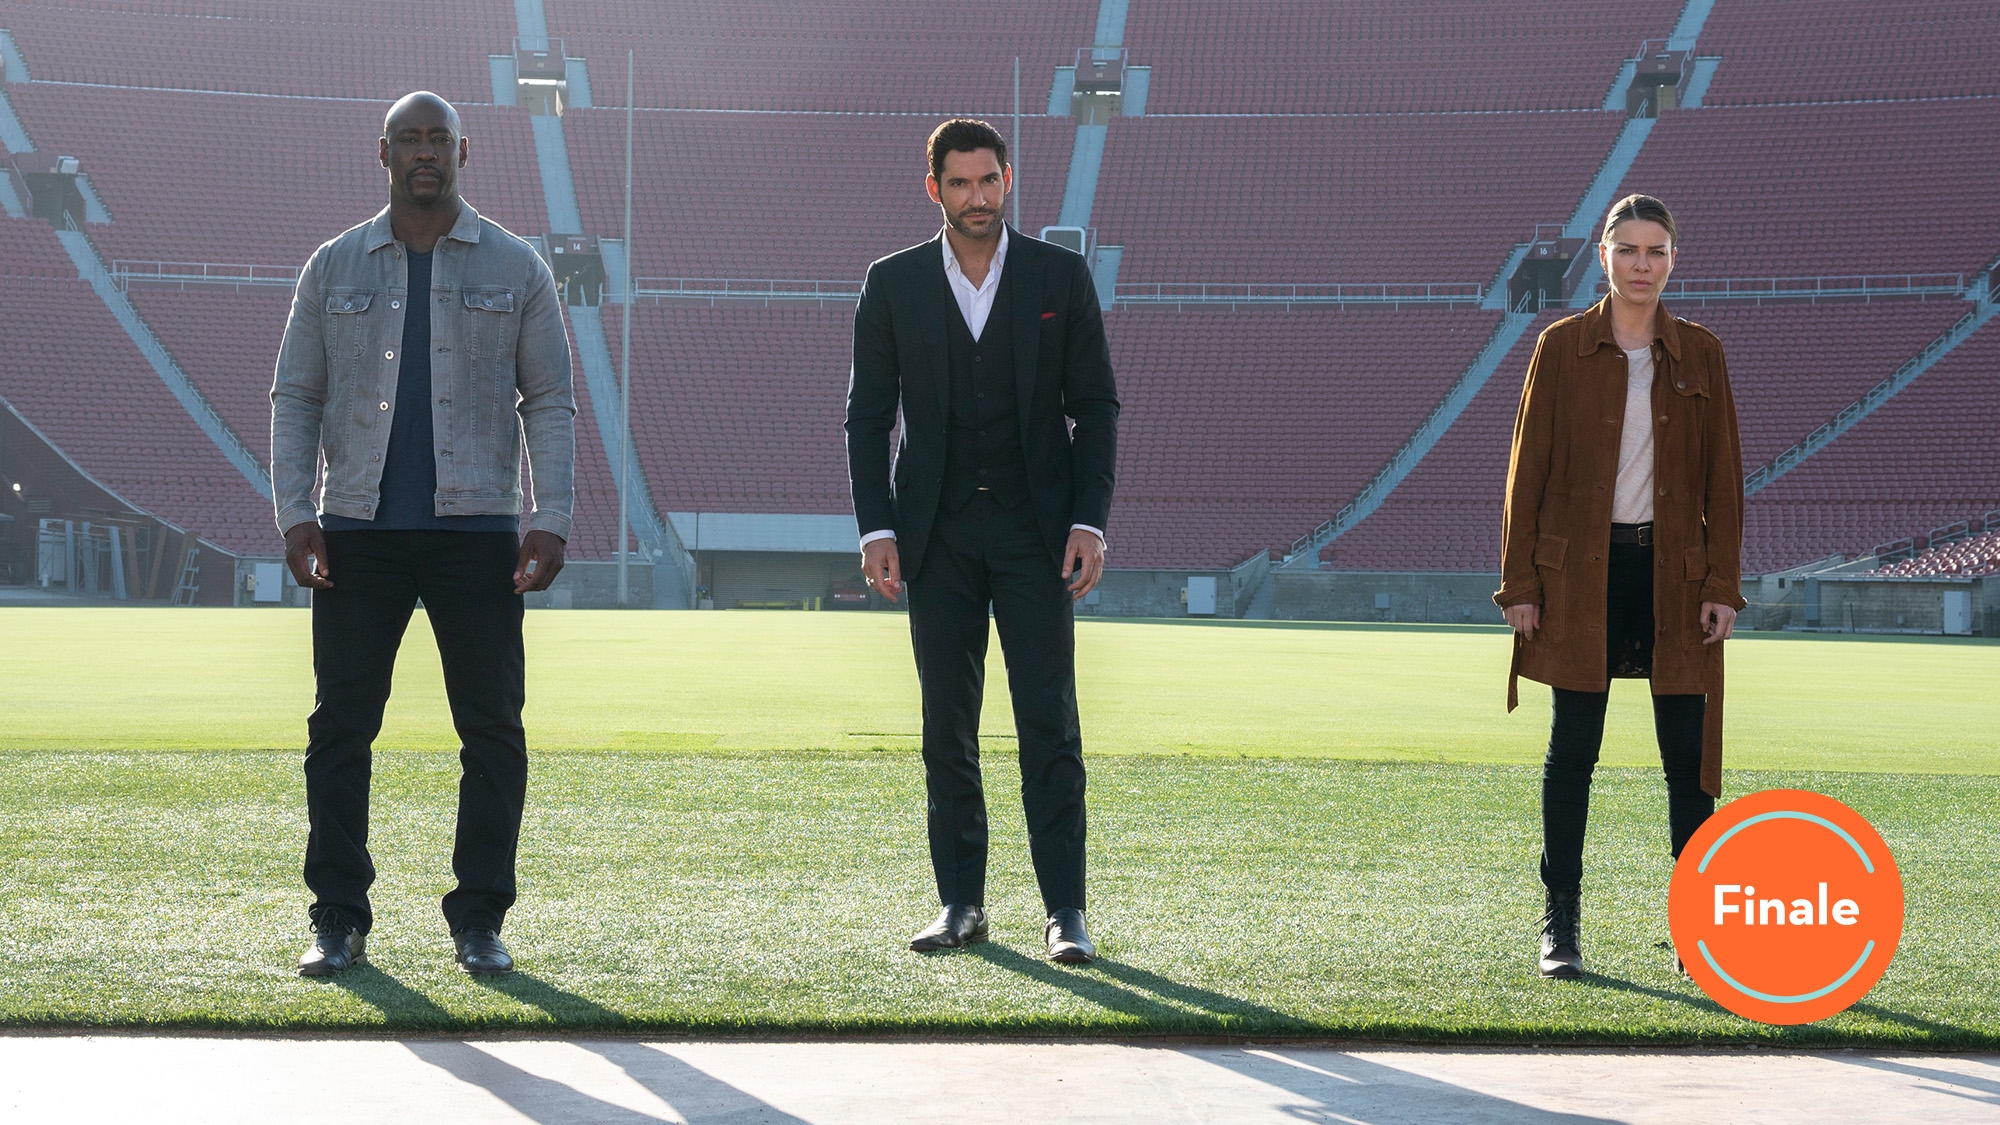 Lucifer wraps up its 5th season with an epic battle and “A Chance At A Happy Ending”